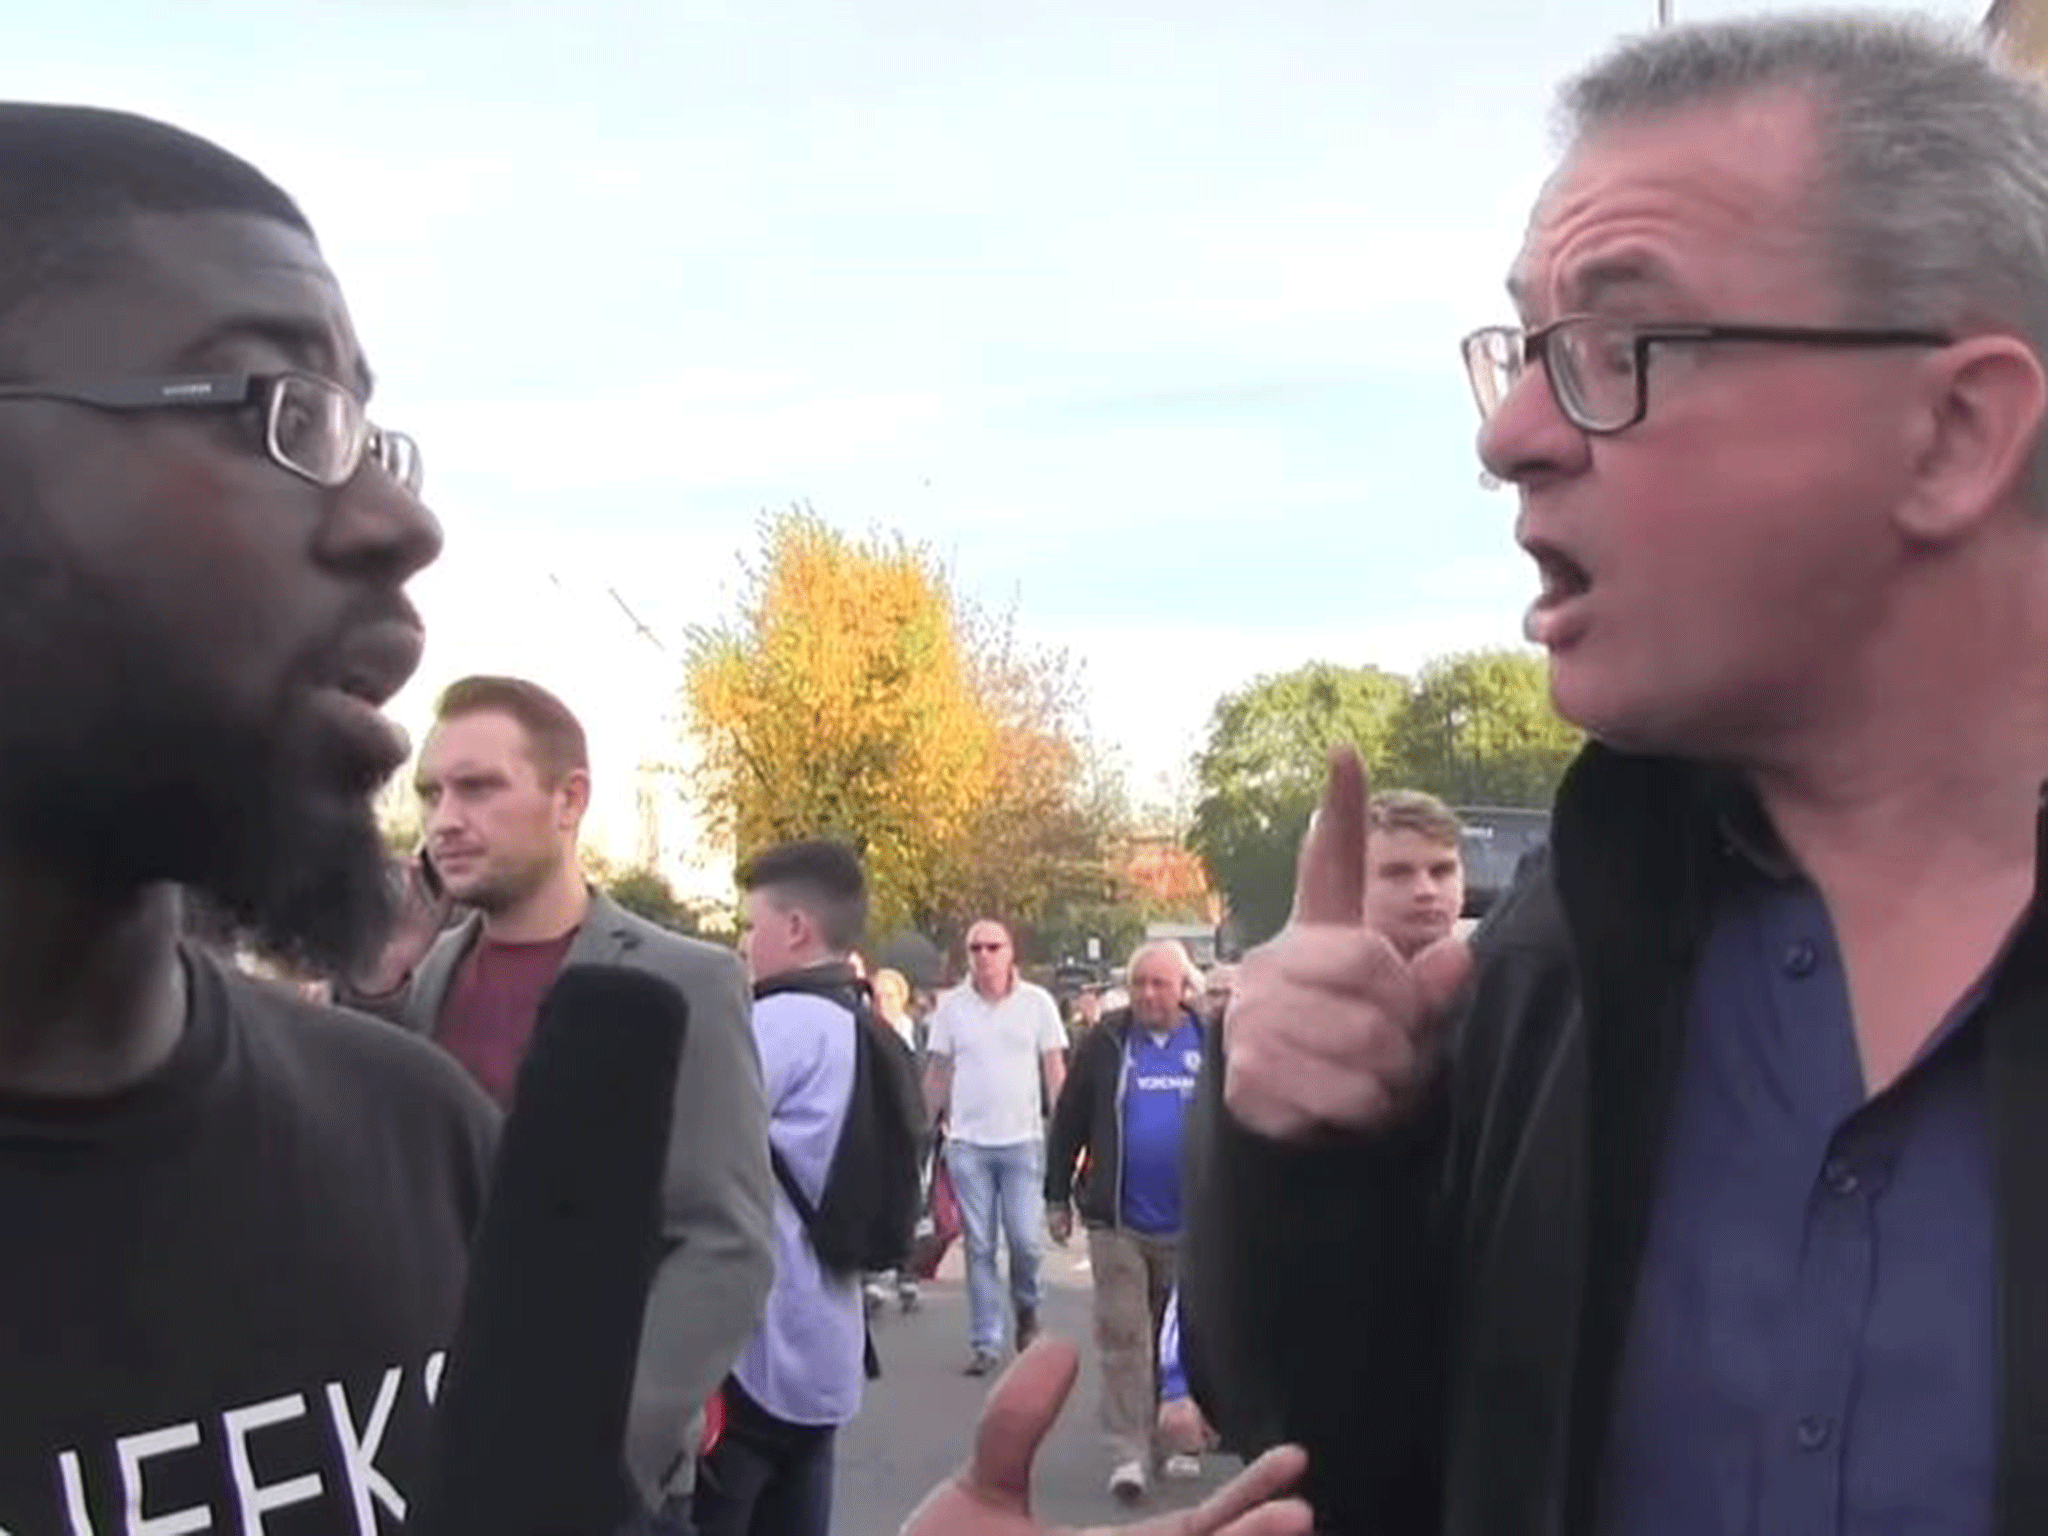 Clive O'Connell, a life-long Chelsea fan, was filmed on camera ranting against Liverpool fans